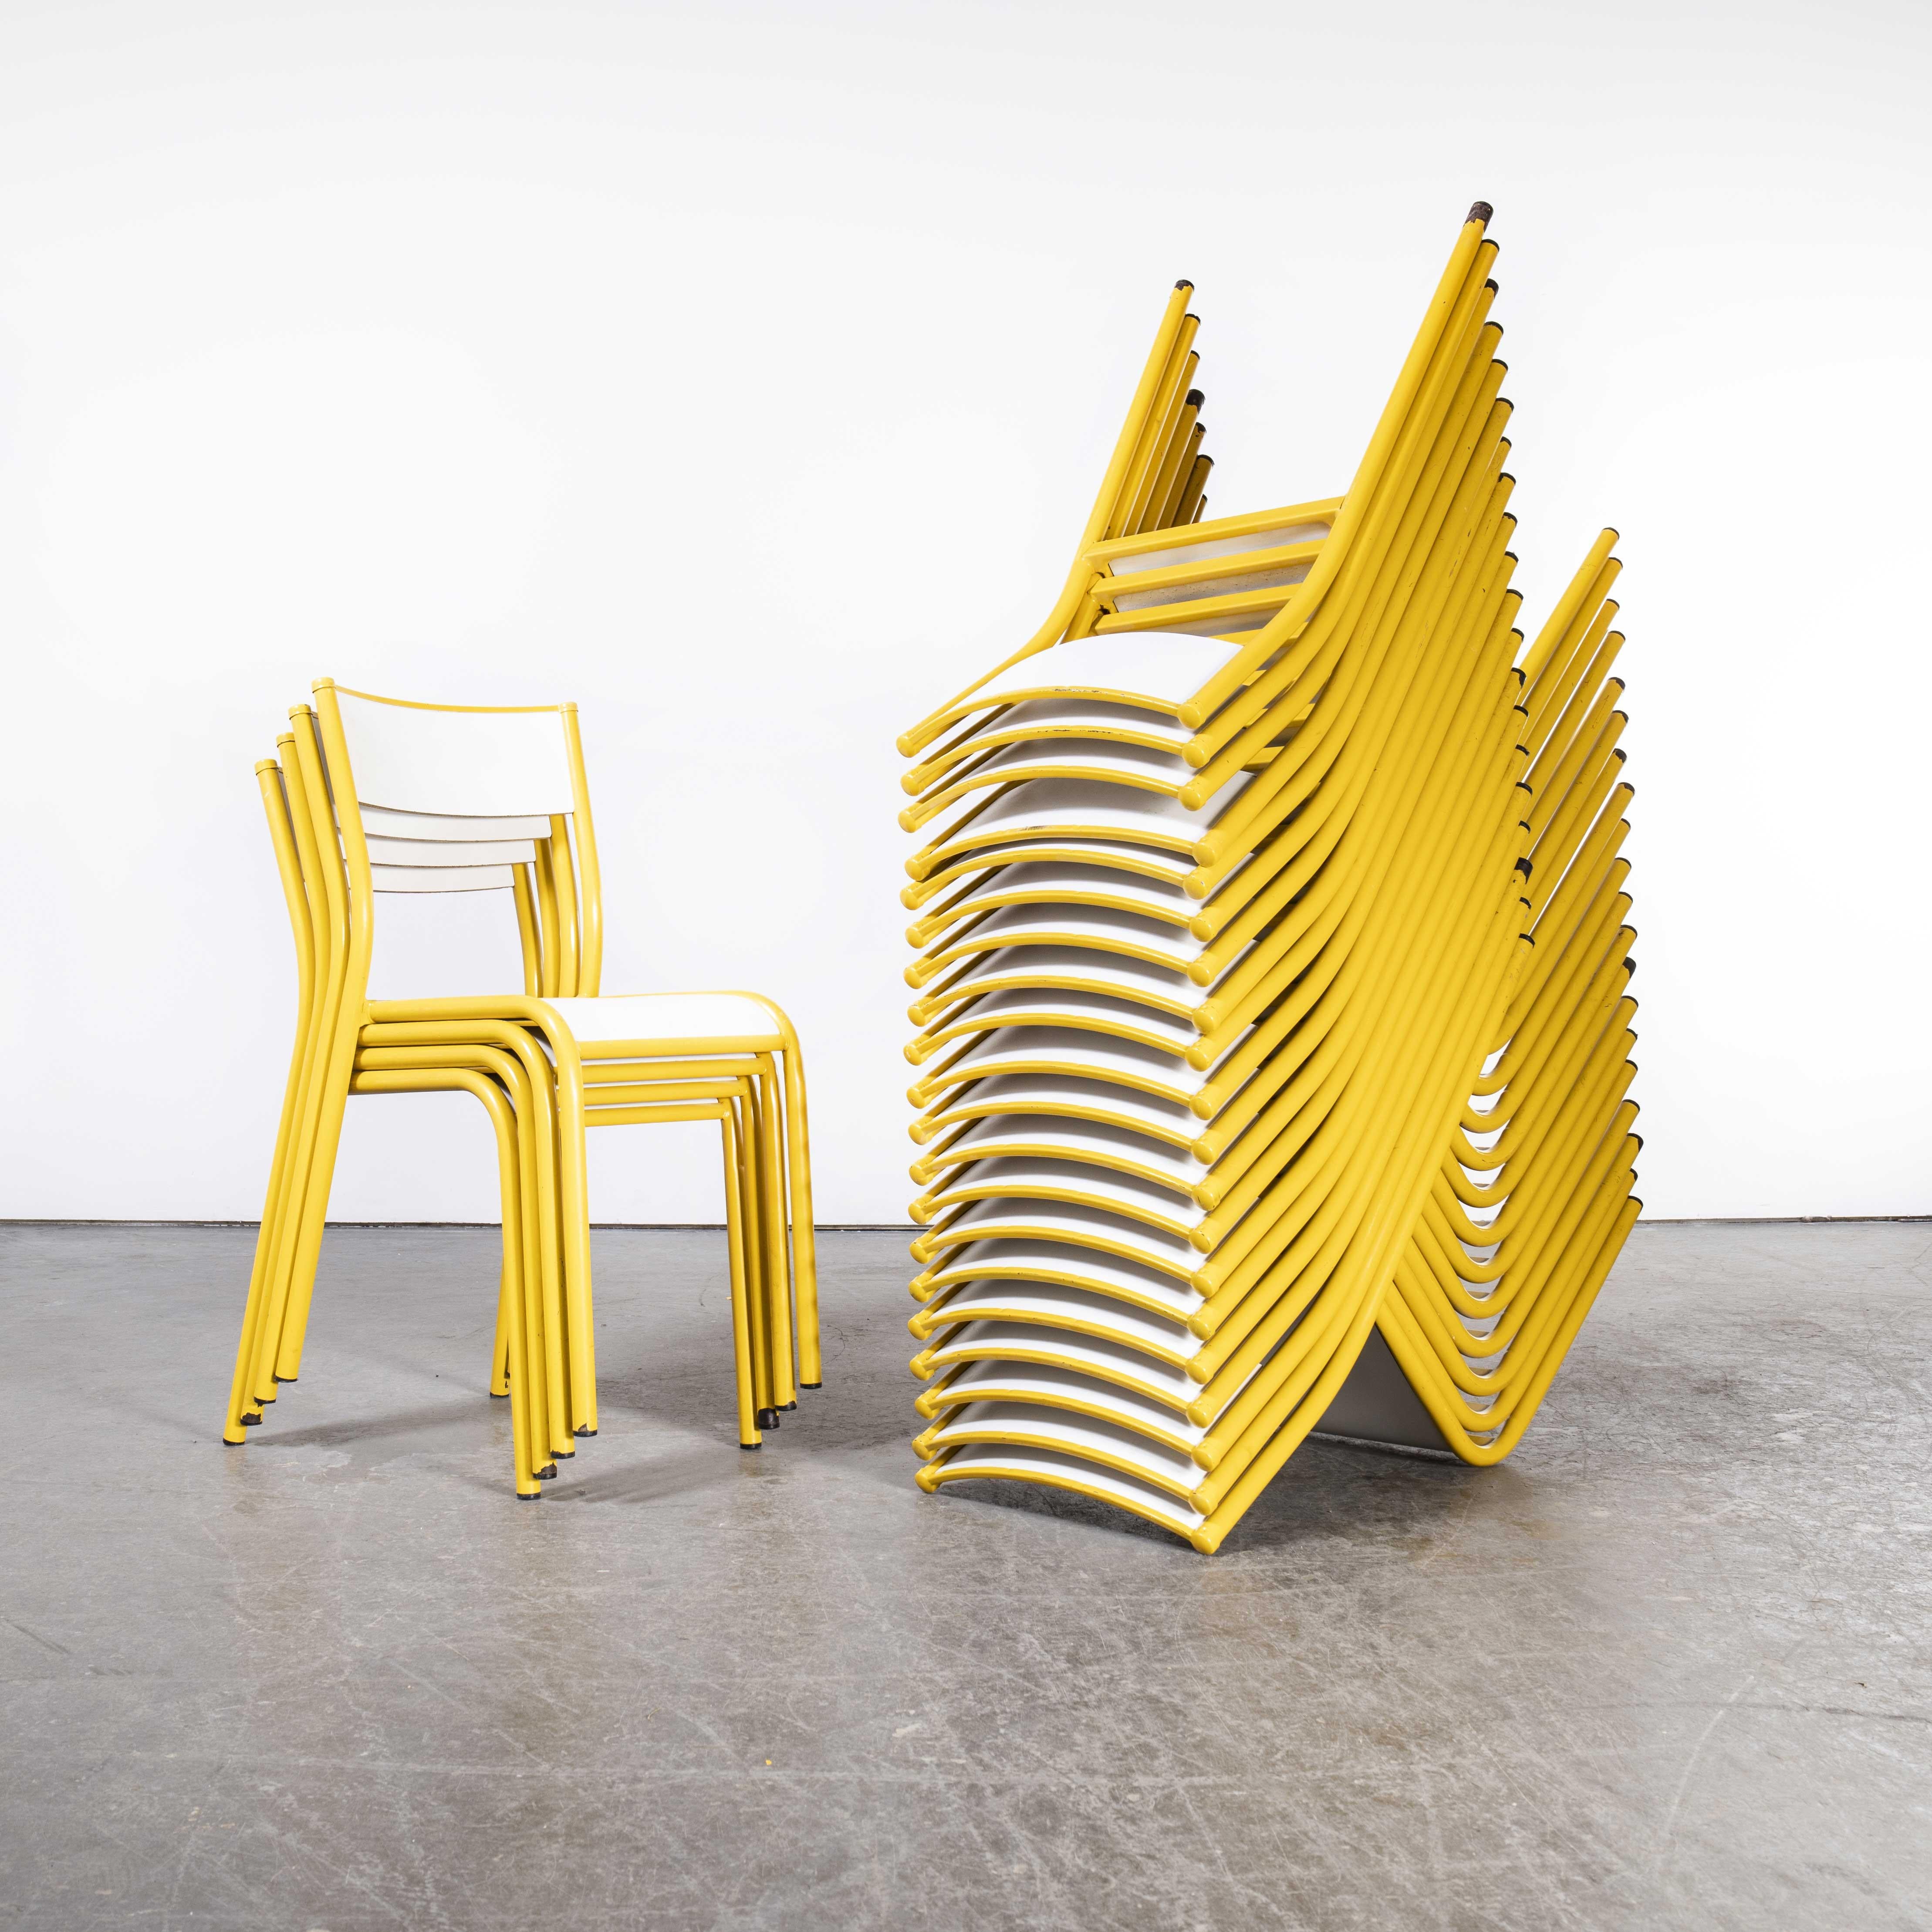 1970’s yellow mullca stacking dining chair – set of twenty four.
1970’s yellow mullca stacking dining chair – set of twenty four. One of our most favourite chairs, in 1947 Robert Muller and Gaston Cavaillon created the company that went on to